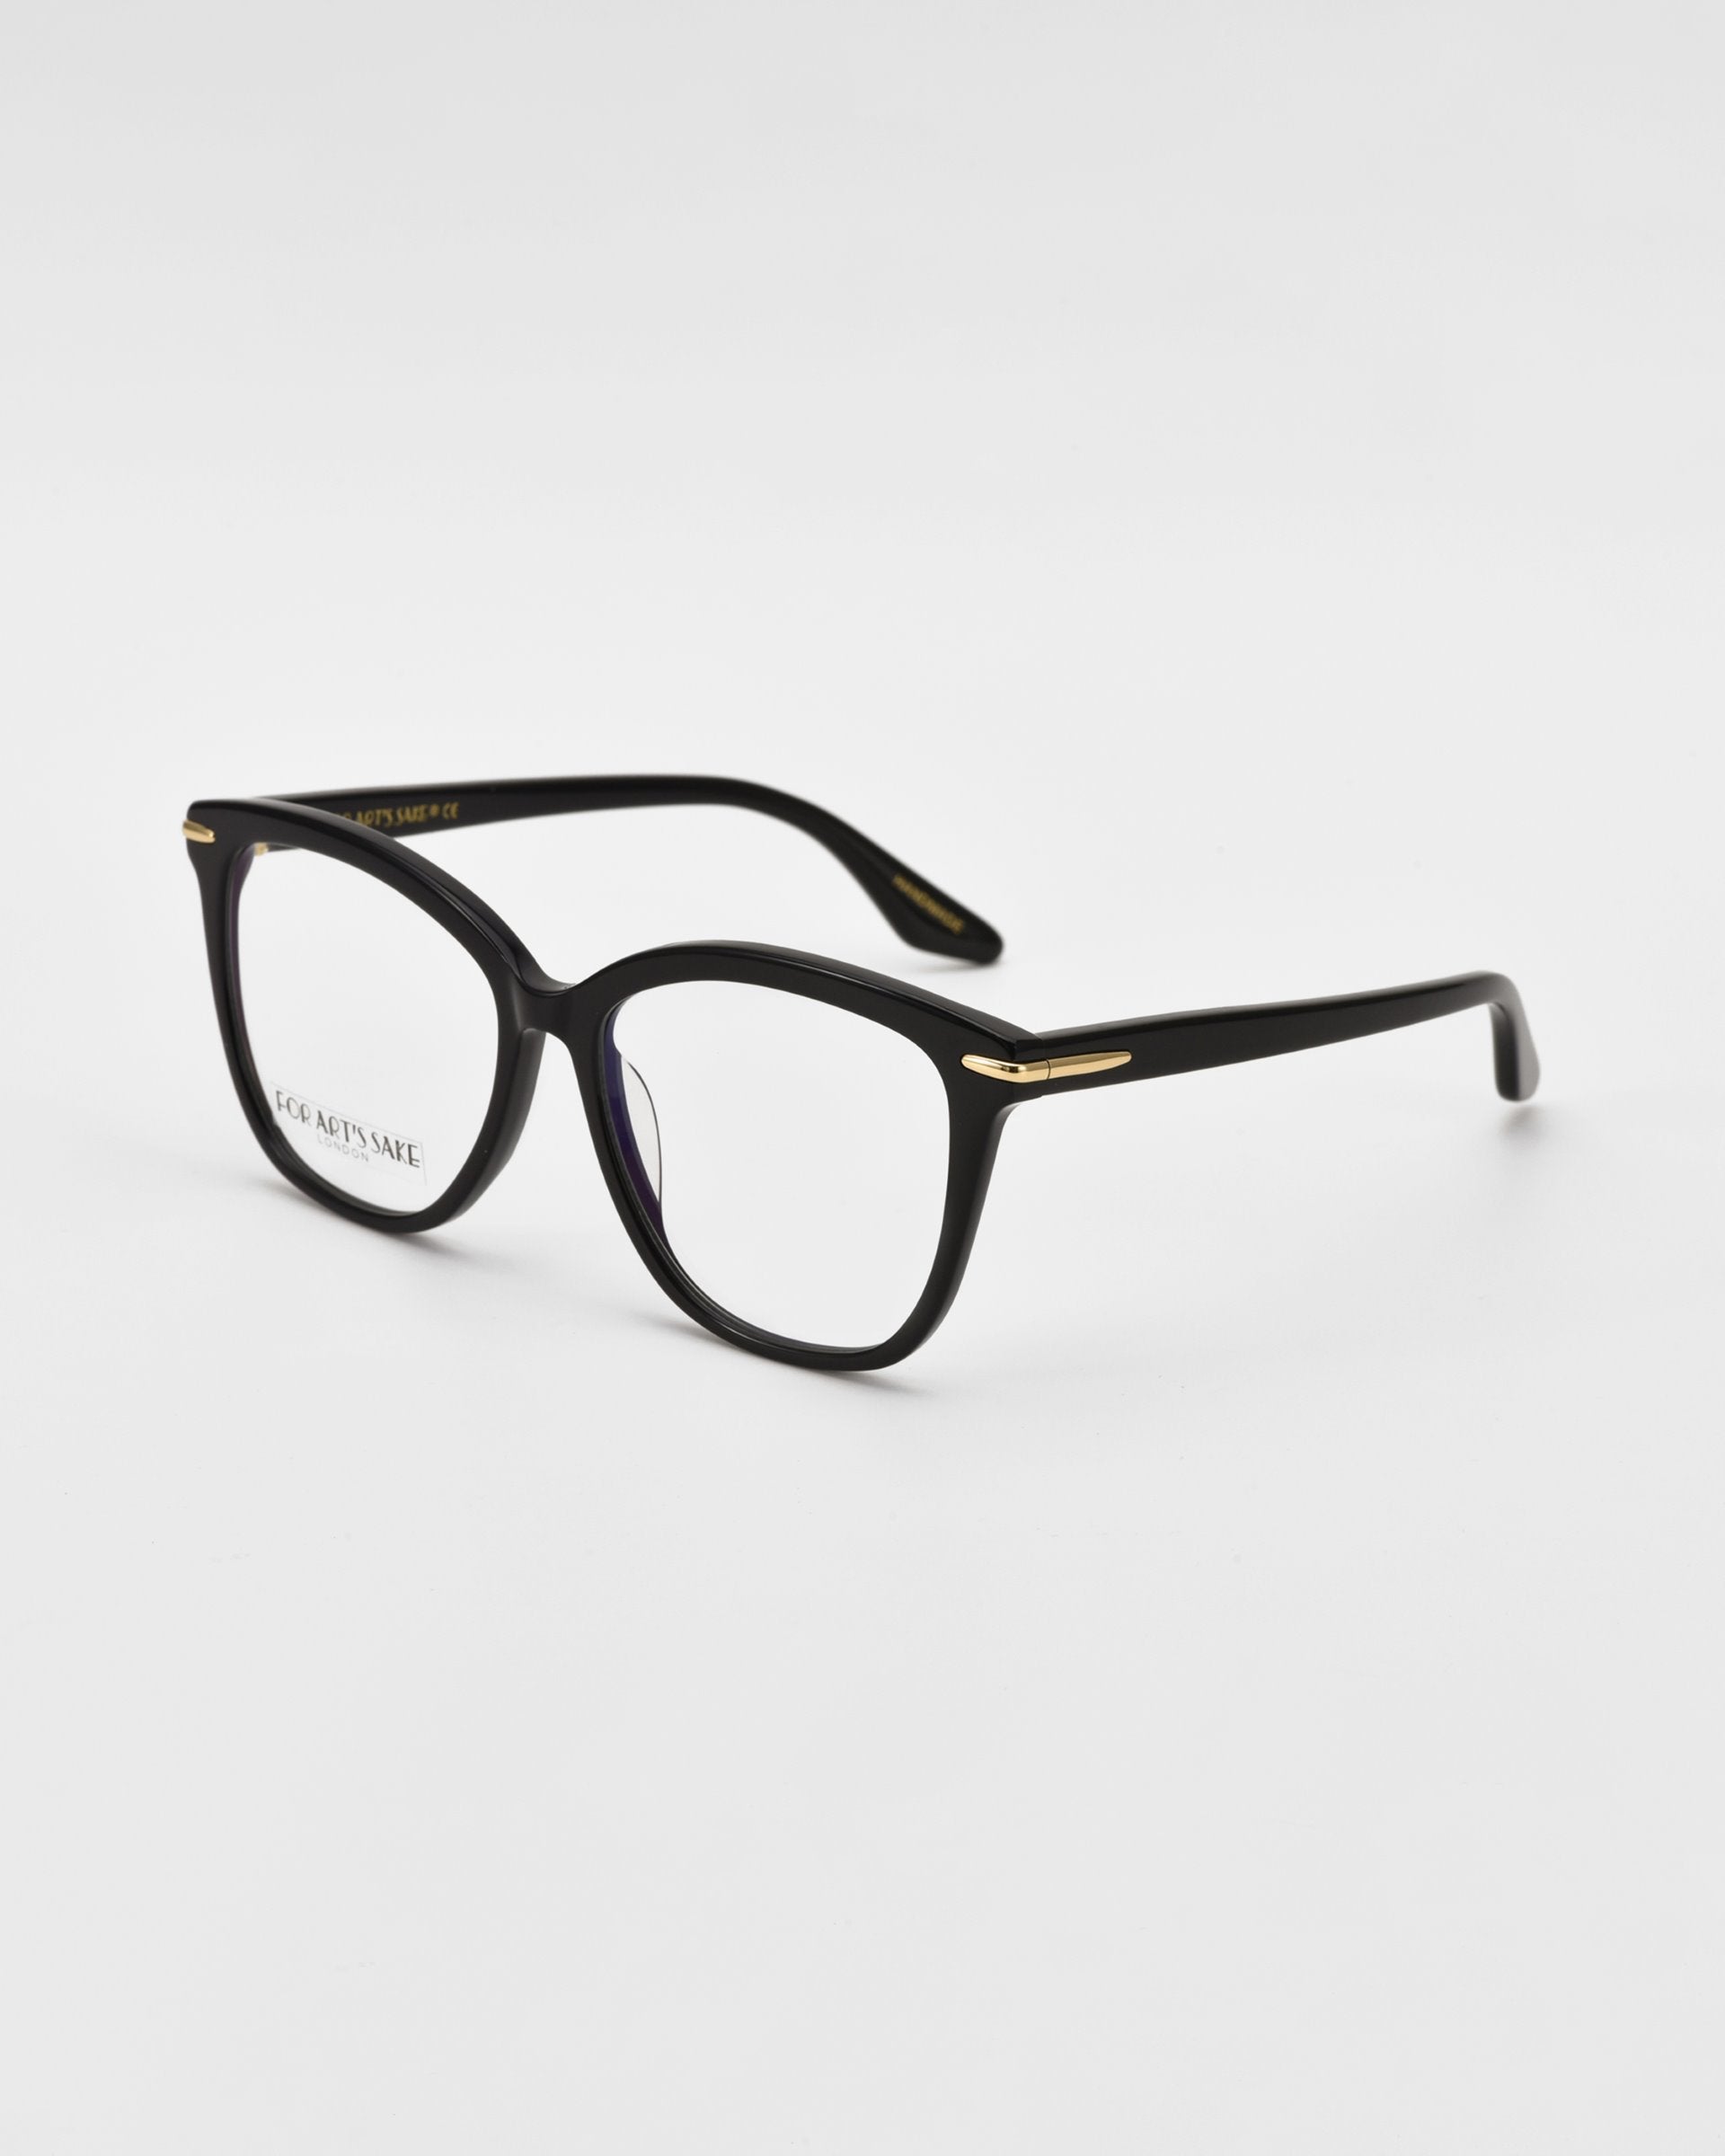 A pair of black For Art&#39;s Sake® Cadenza optical glasses with rounded rectangular lenses and gold accents on the hinges. The glasses are placed at an angle on a clean, white background.